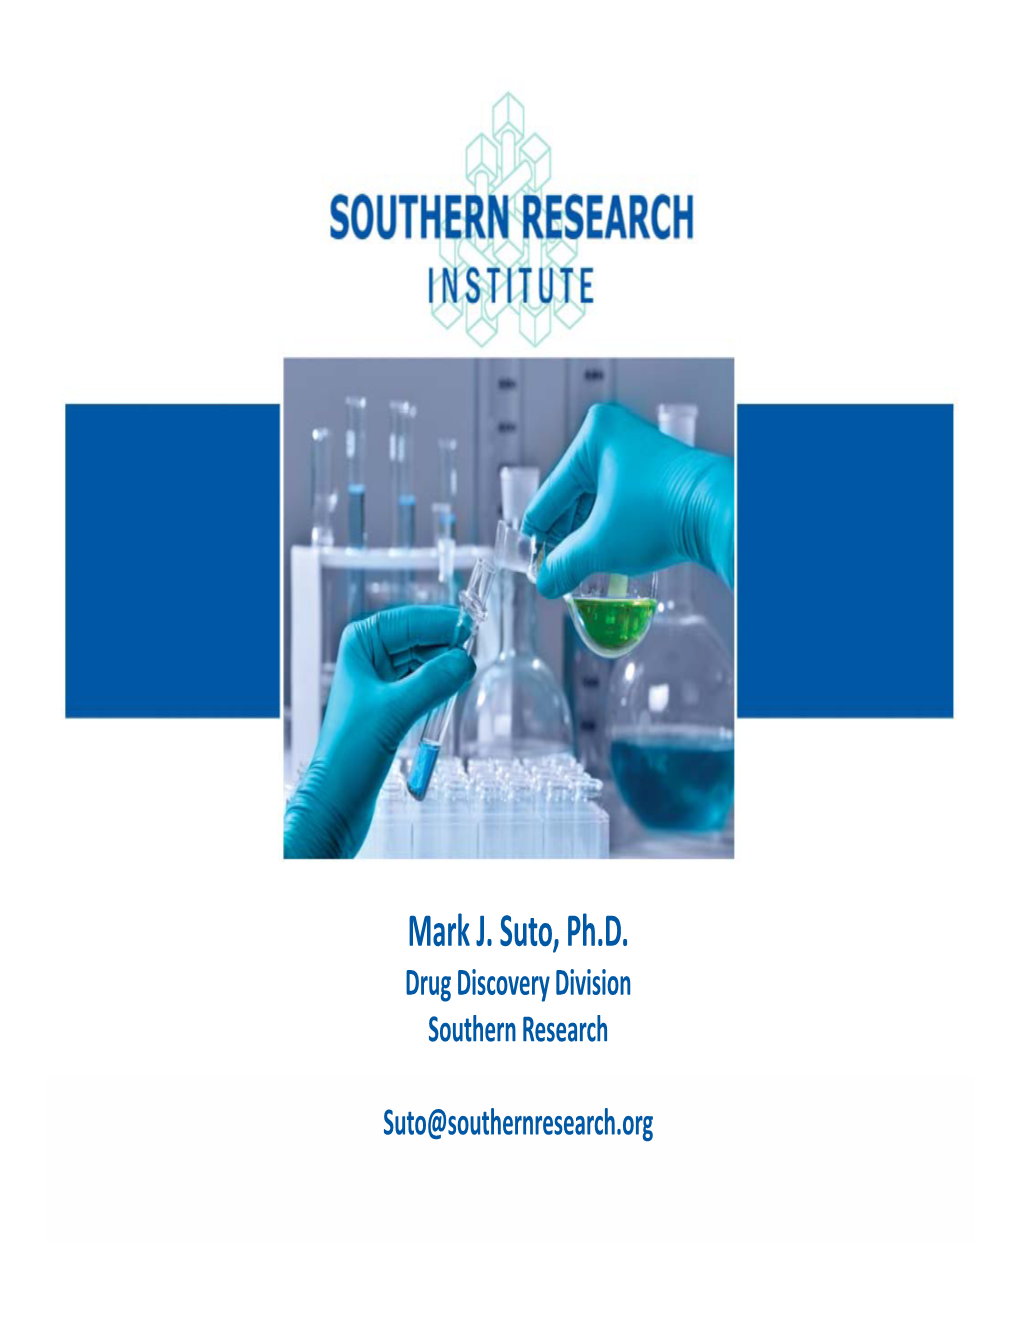 Mark J. Suto, Ph.D. Drug Discovery Division Southern Research